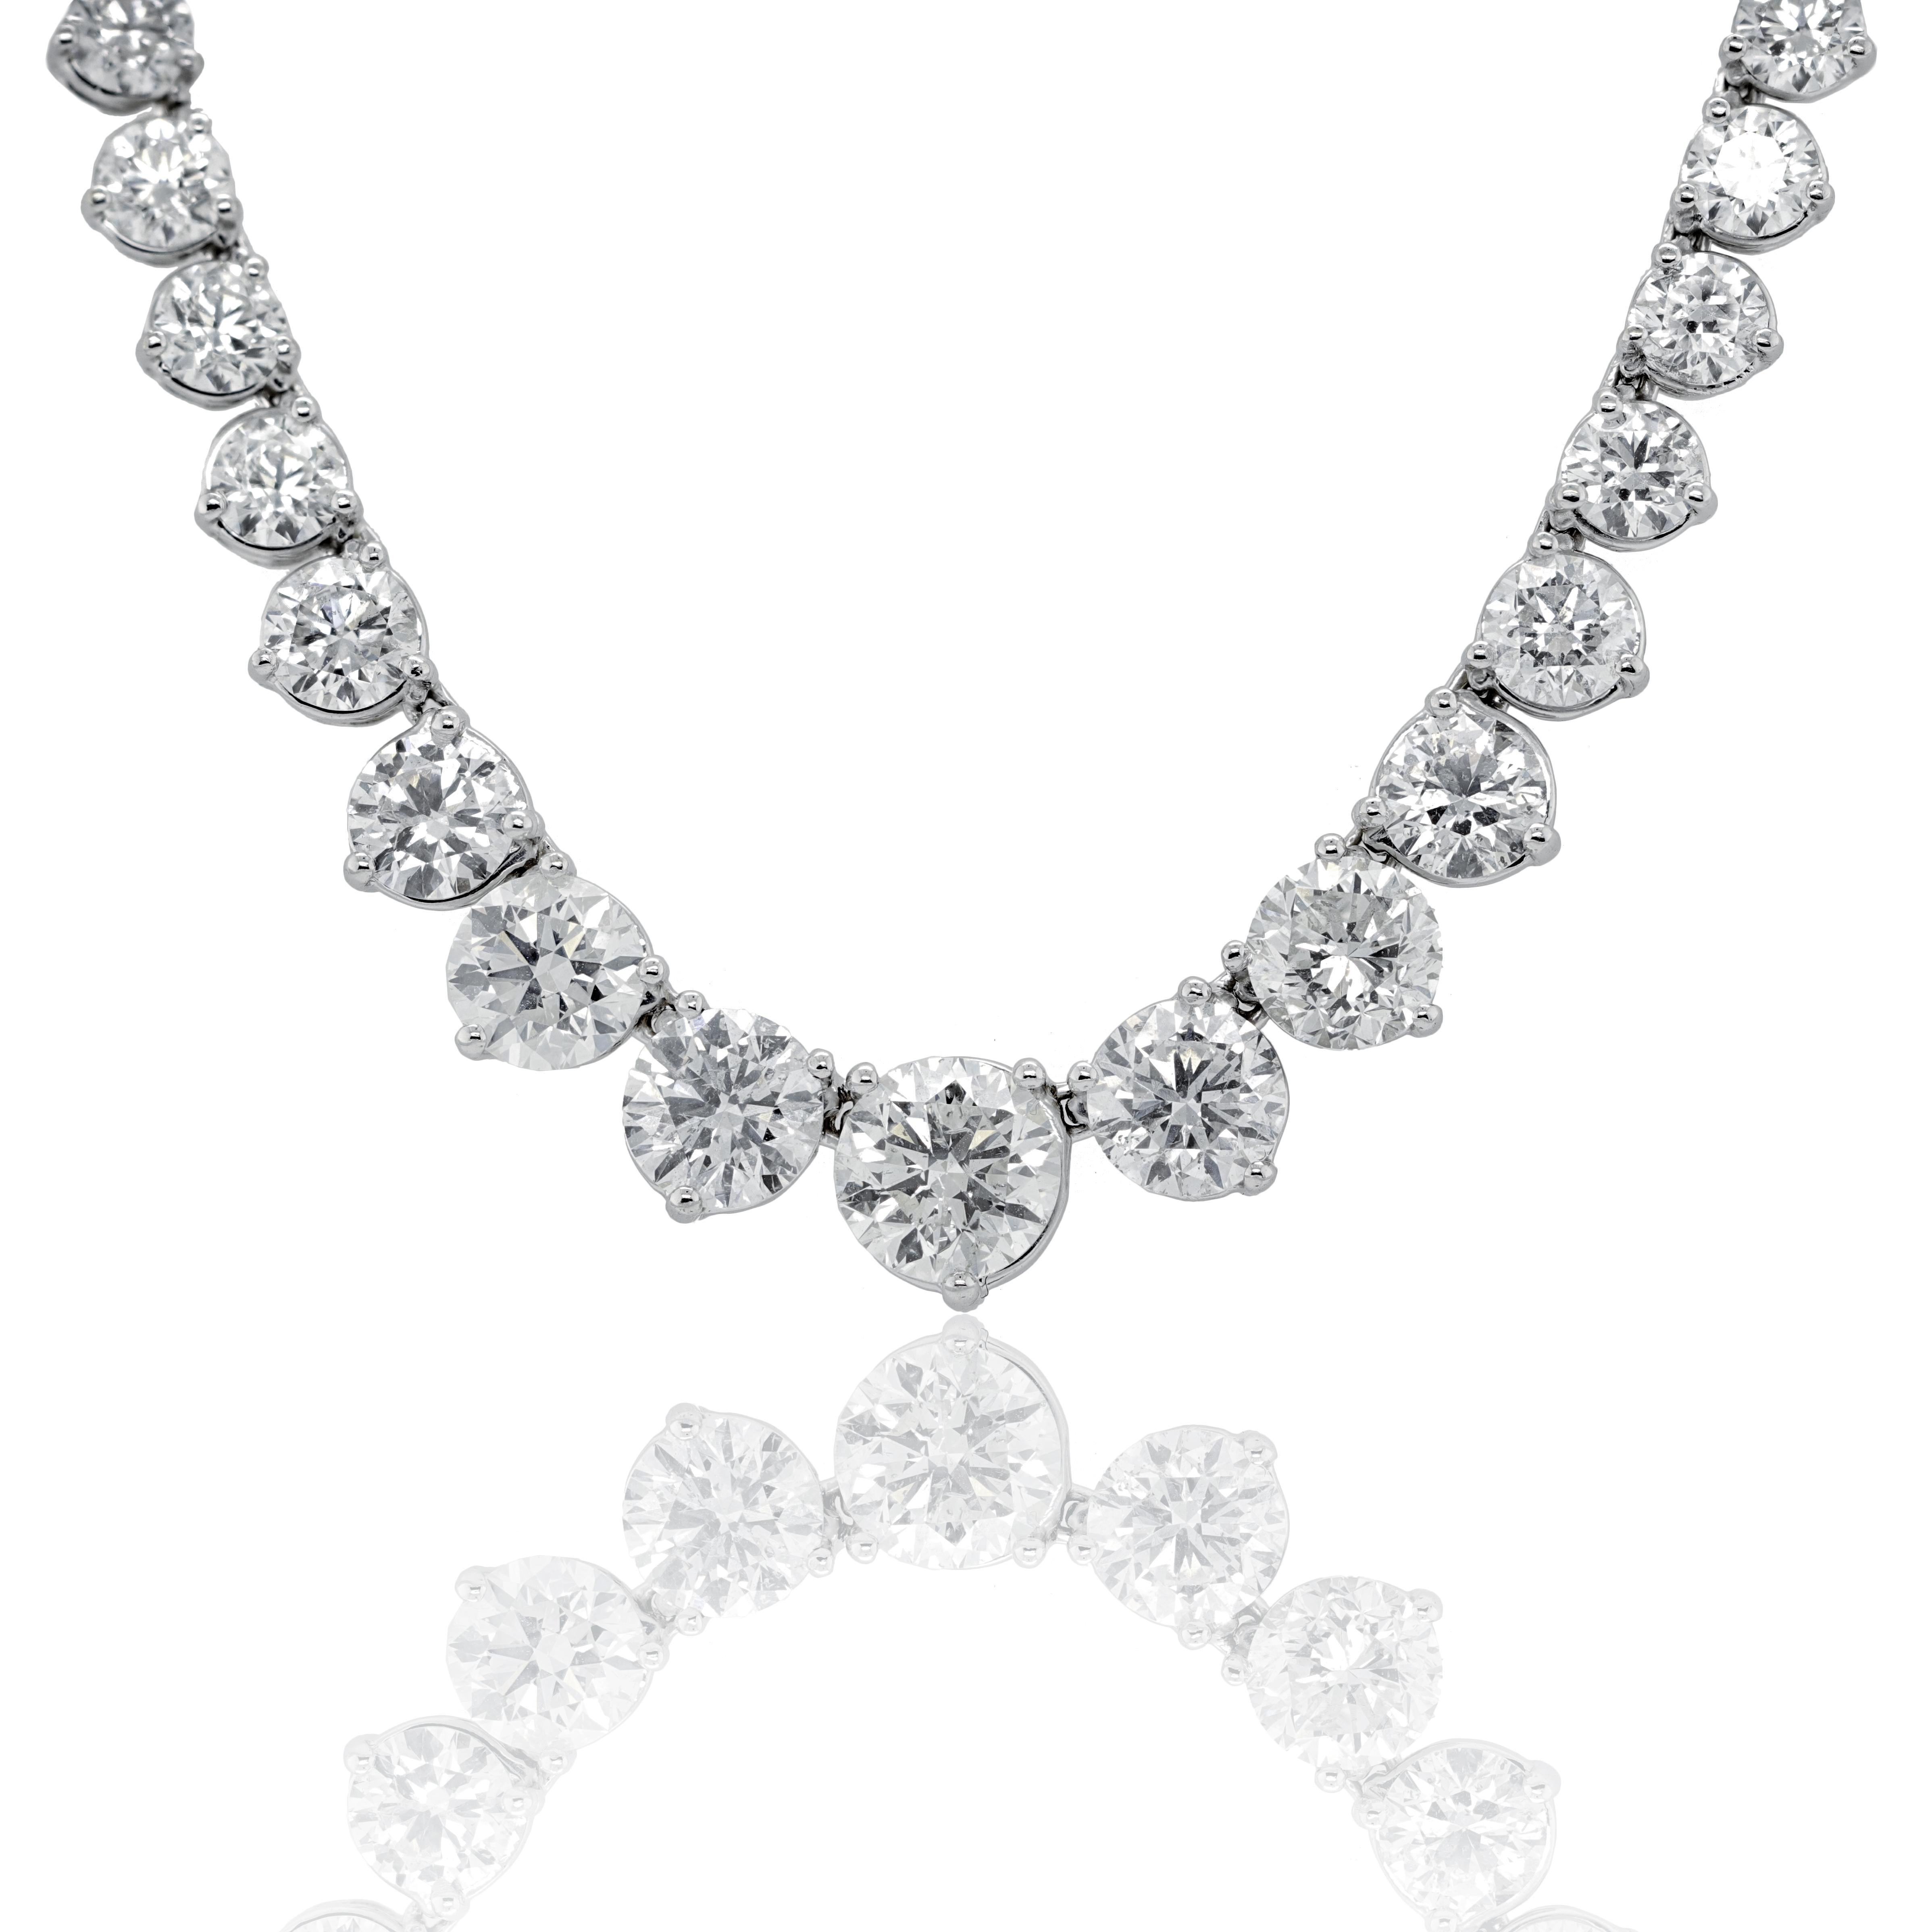  Custom 18k white gold graduated tennis necklace featuring 23.60 cts of round brilliant diamonds  89 stones 0.27 each  set in a 3 prong setting FG color SI clarity. Excellent  cut. 
